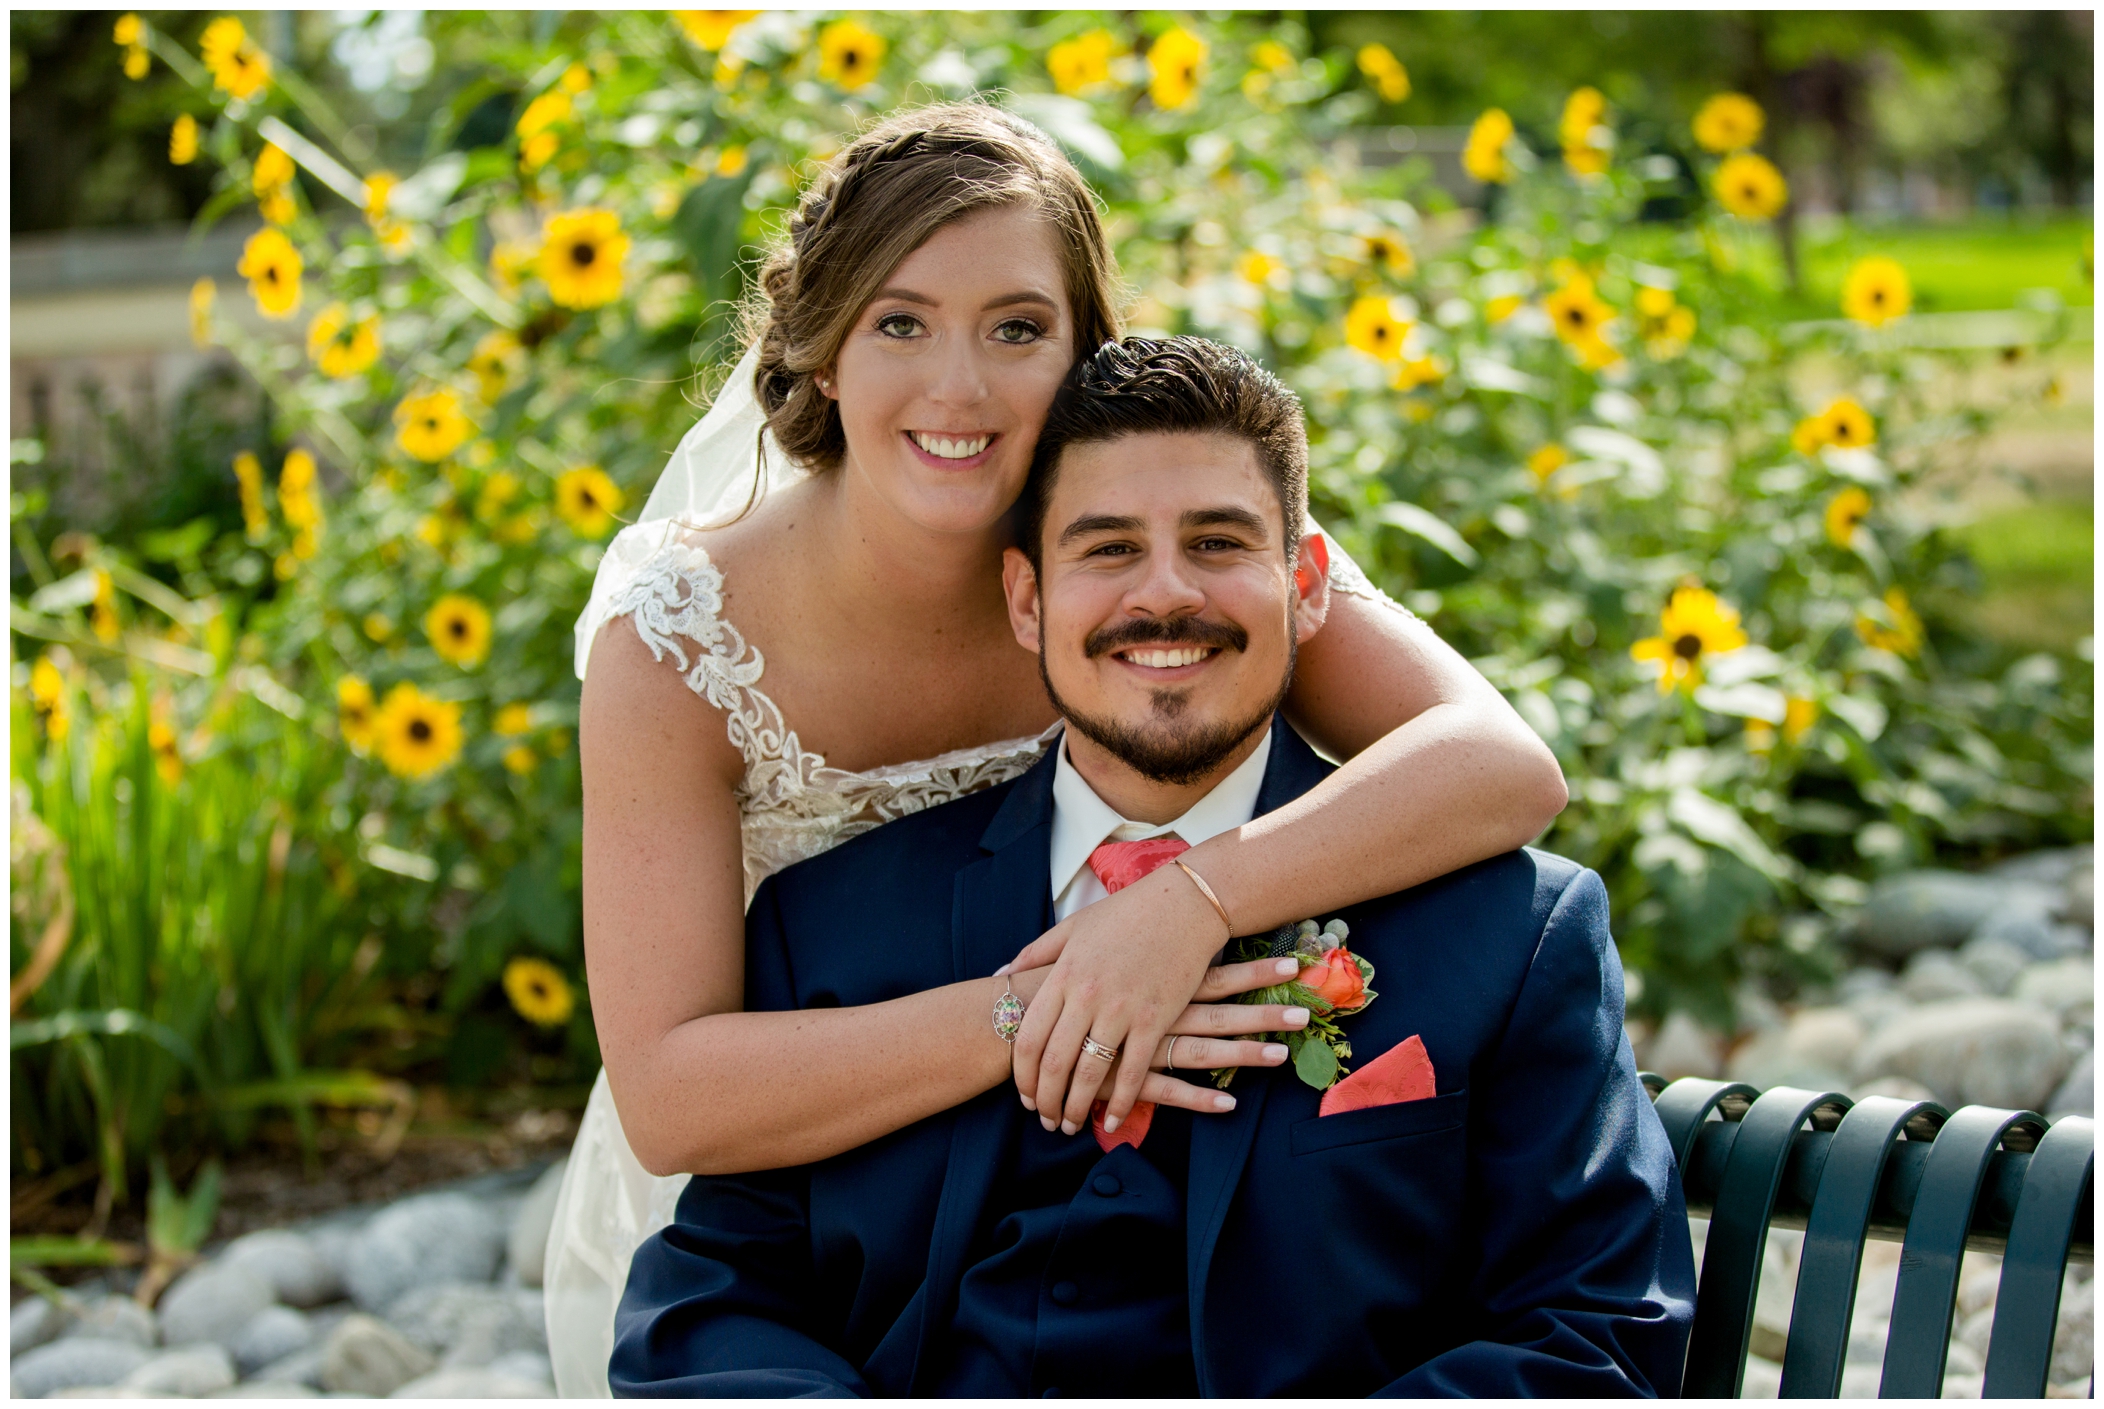 wedding photos with sunflowers in background at Doubletree Hotel Greeley Colorado